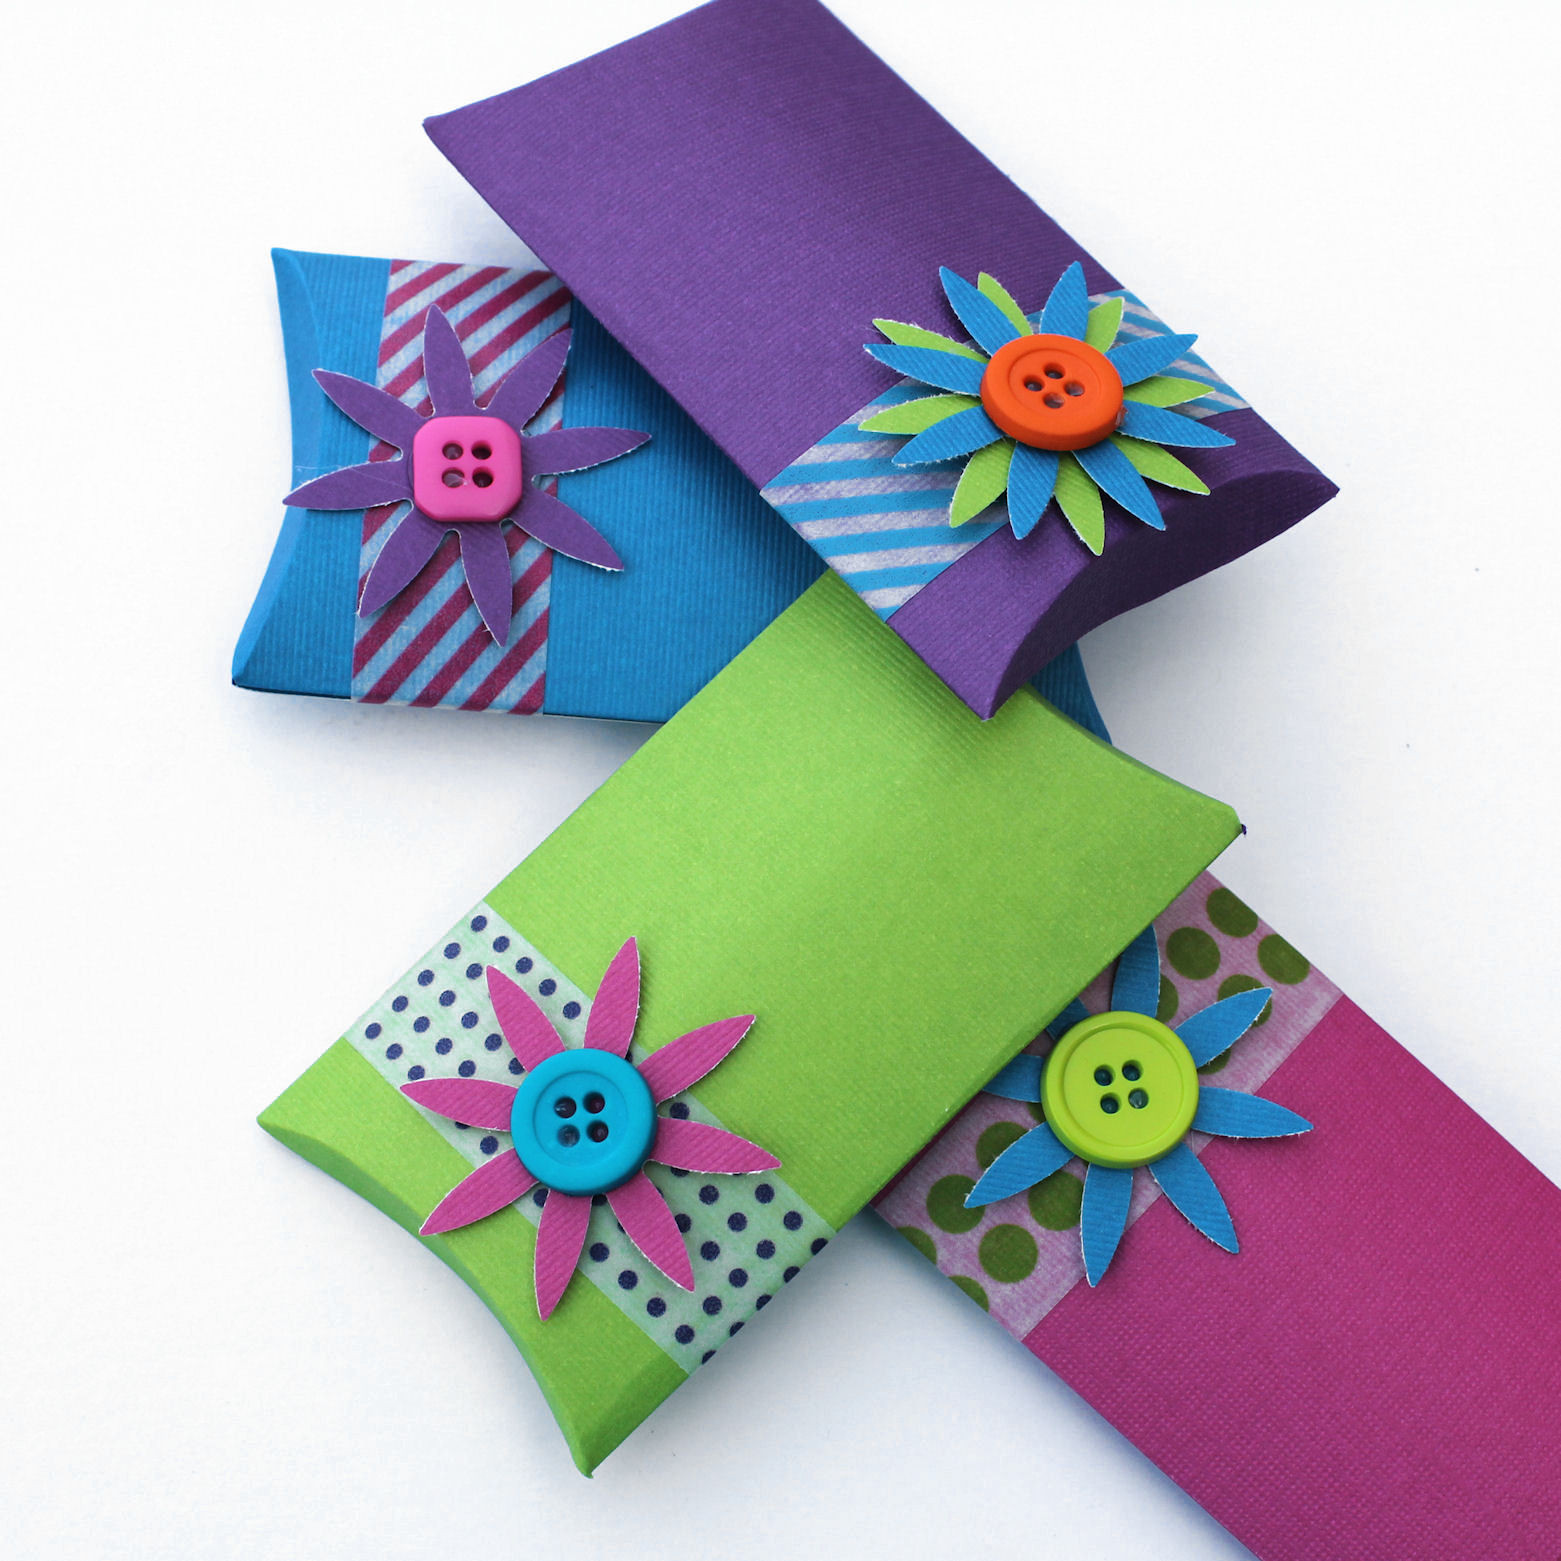 DIY Jewelry Gift Boxes
 Best DIY Jewelry Card and Gift Box Tutorials